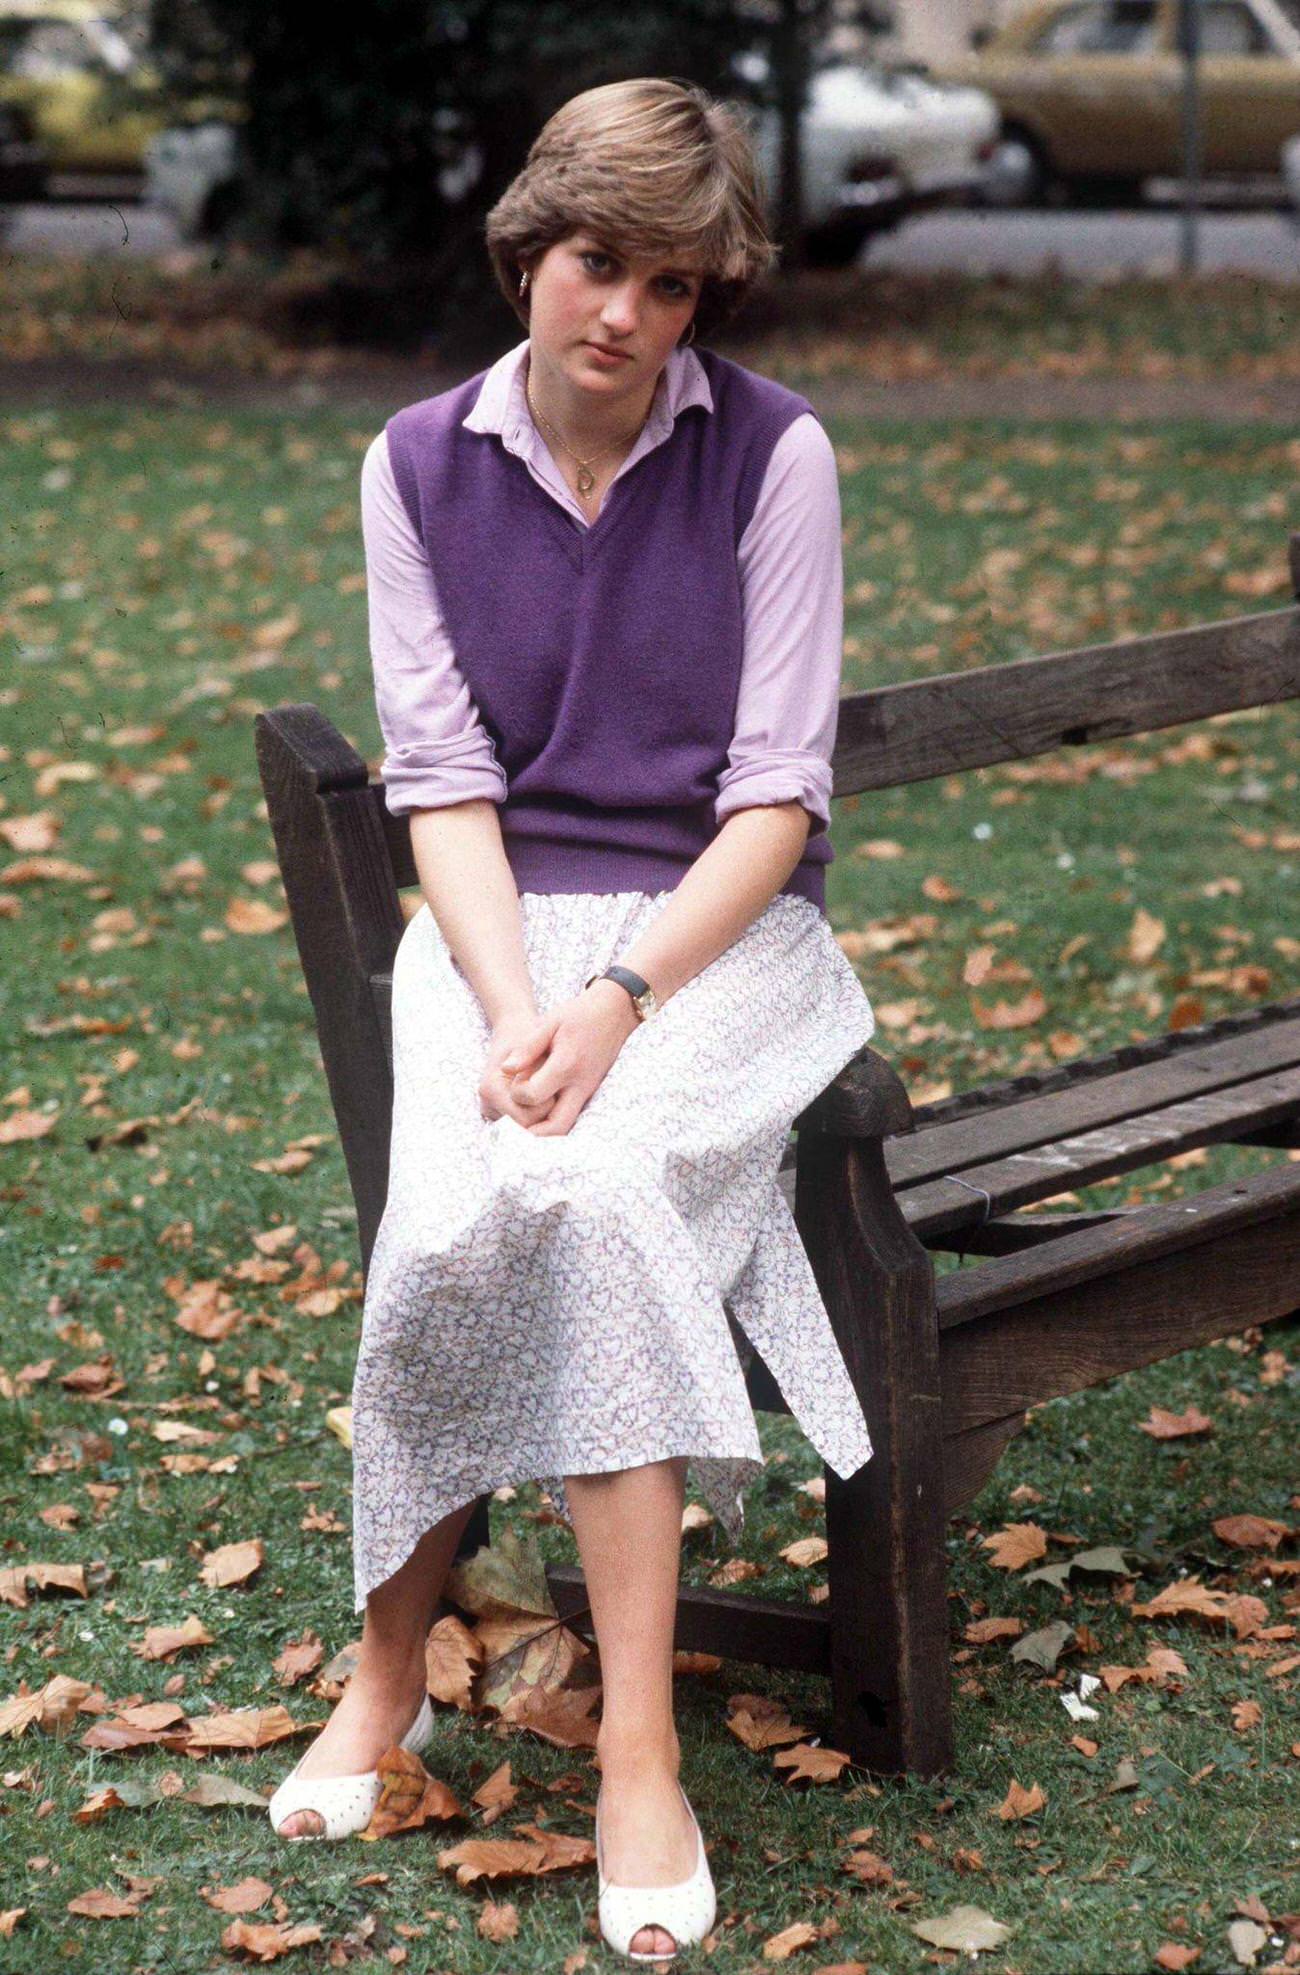 Lady Diana Spencer Age 19 At The Young England Kindergarden School At St.saviours Church Hall St. Georges Sq In London's Pimlico.